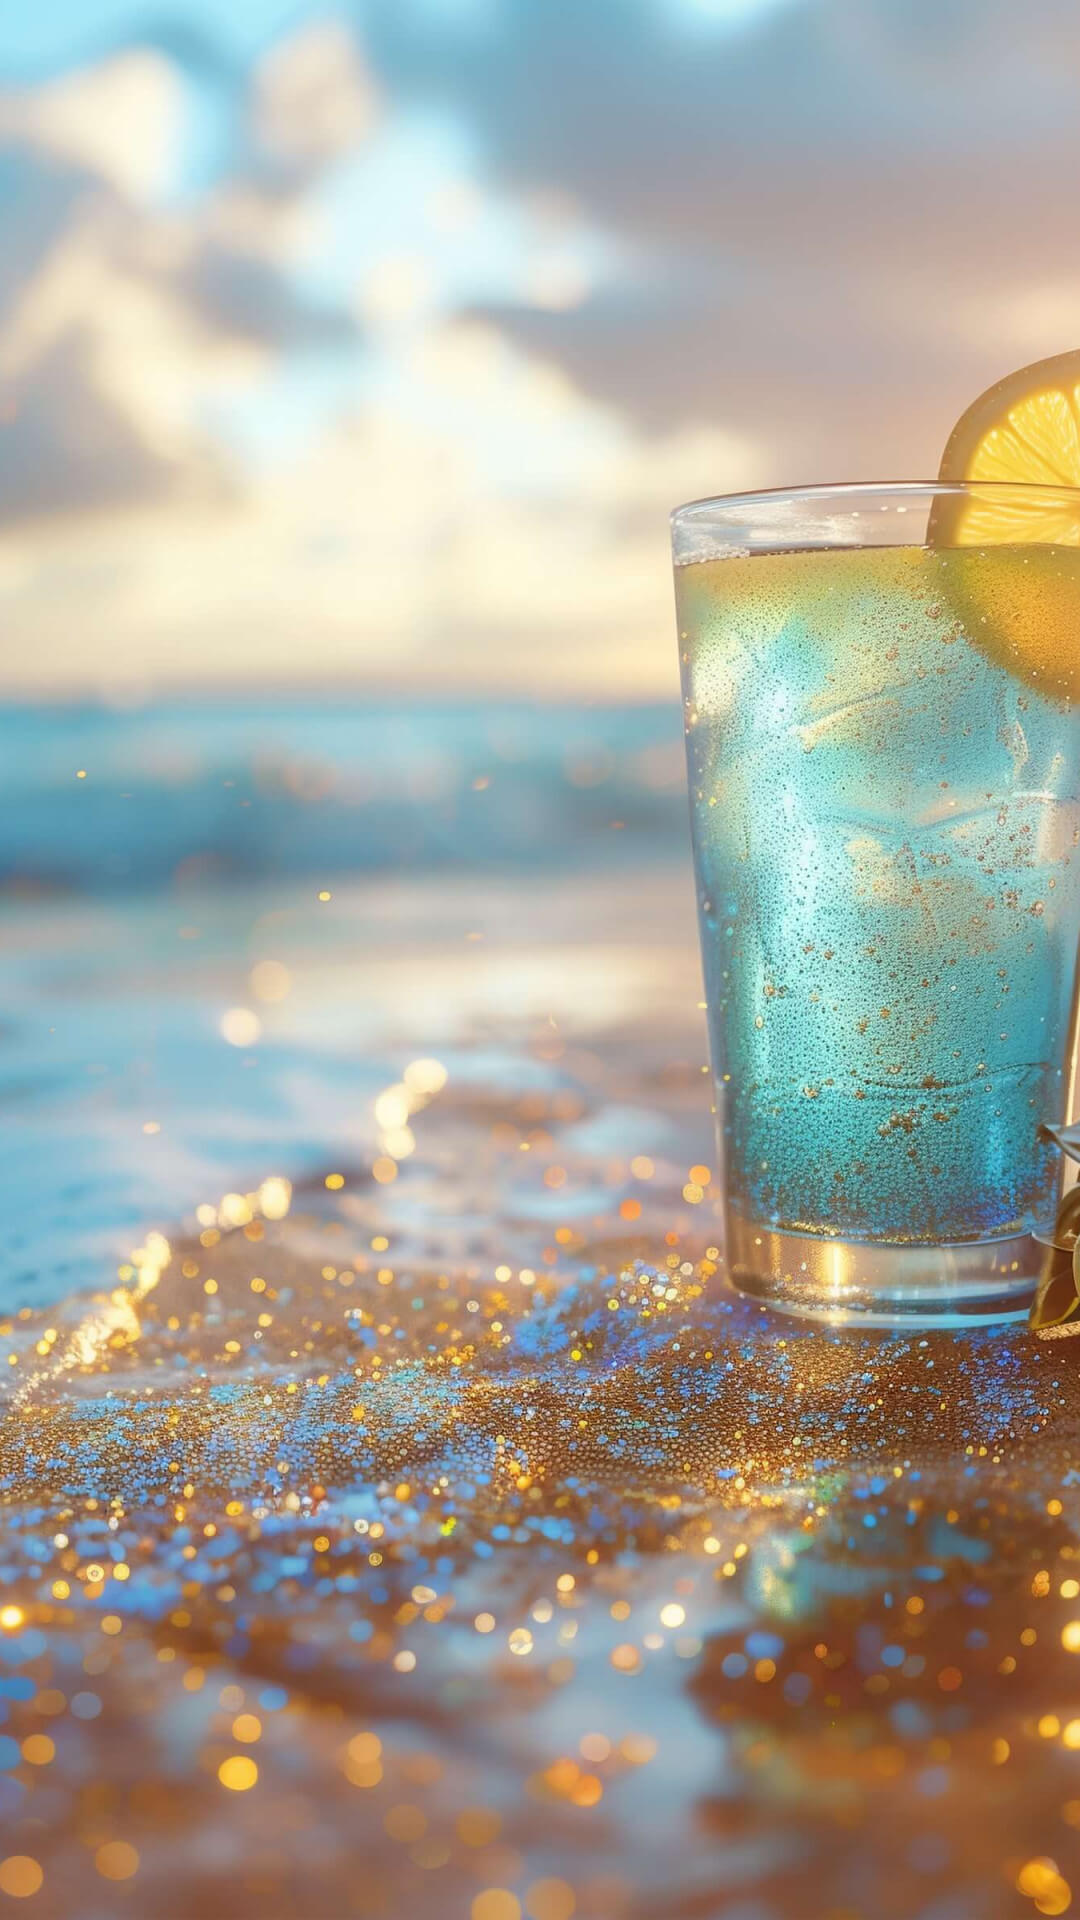 Cold drink on the ocean shore wallpaper 1080x1920